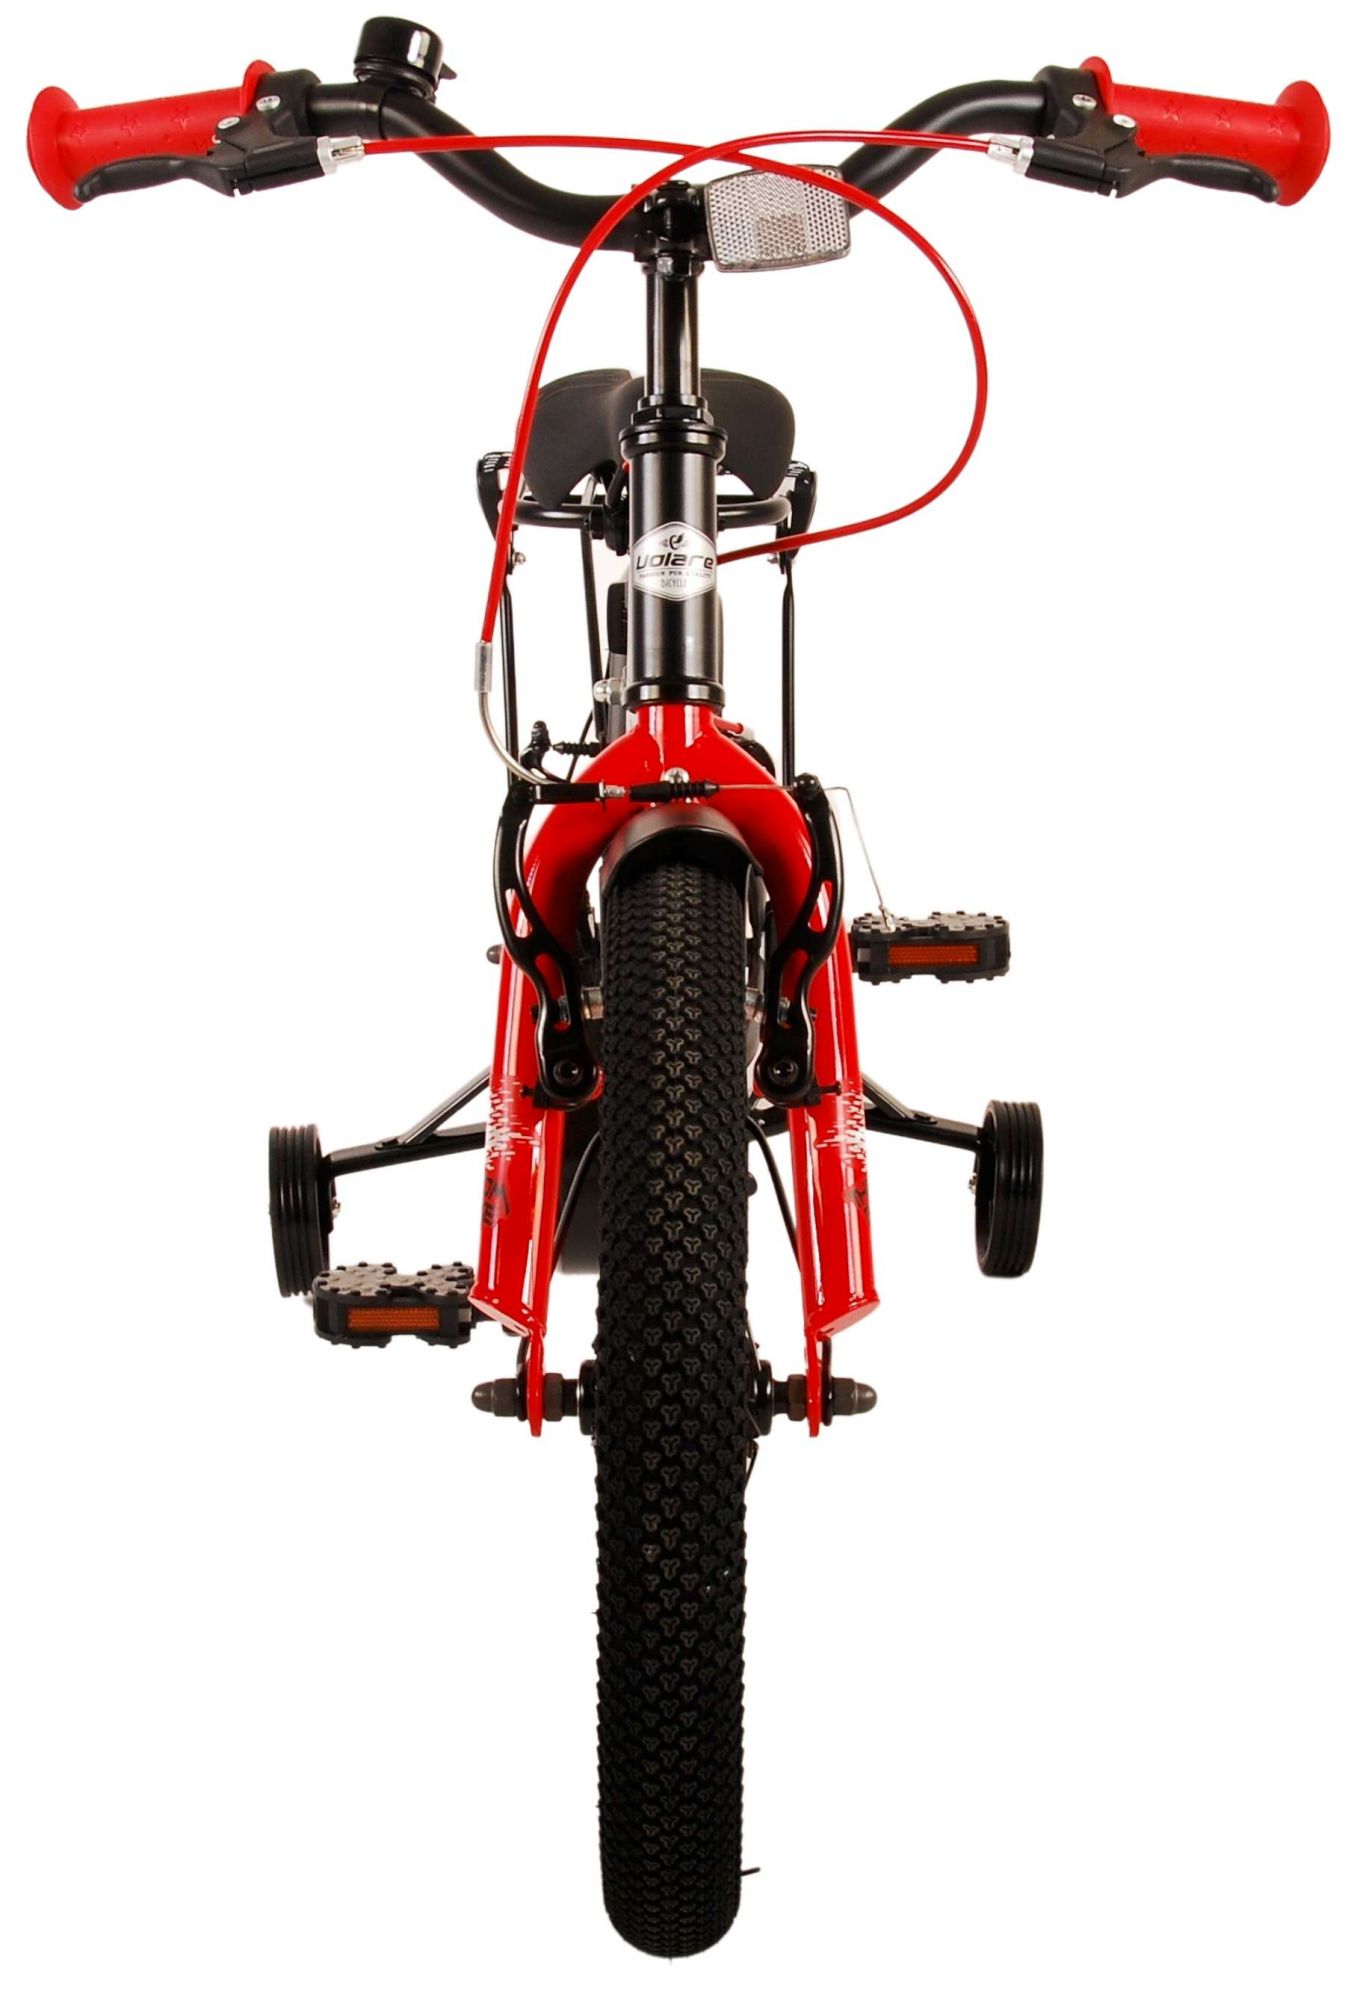 Thombike_16_inch_Rood_-_10-W1800